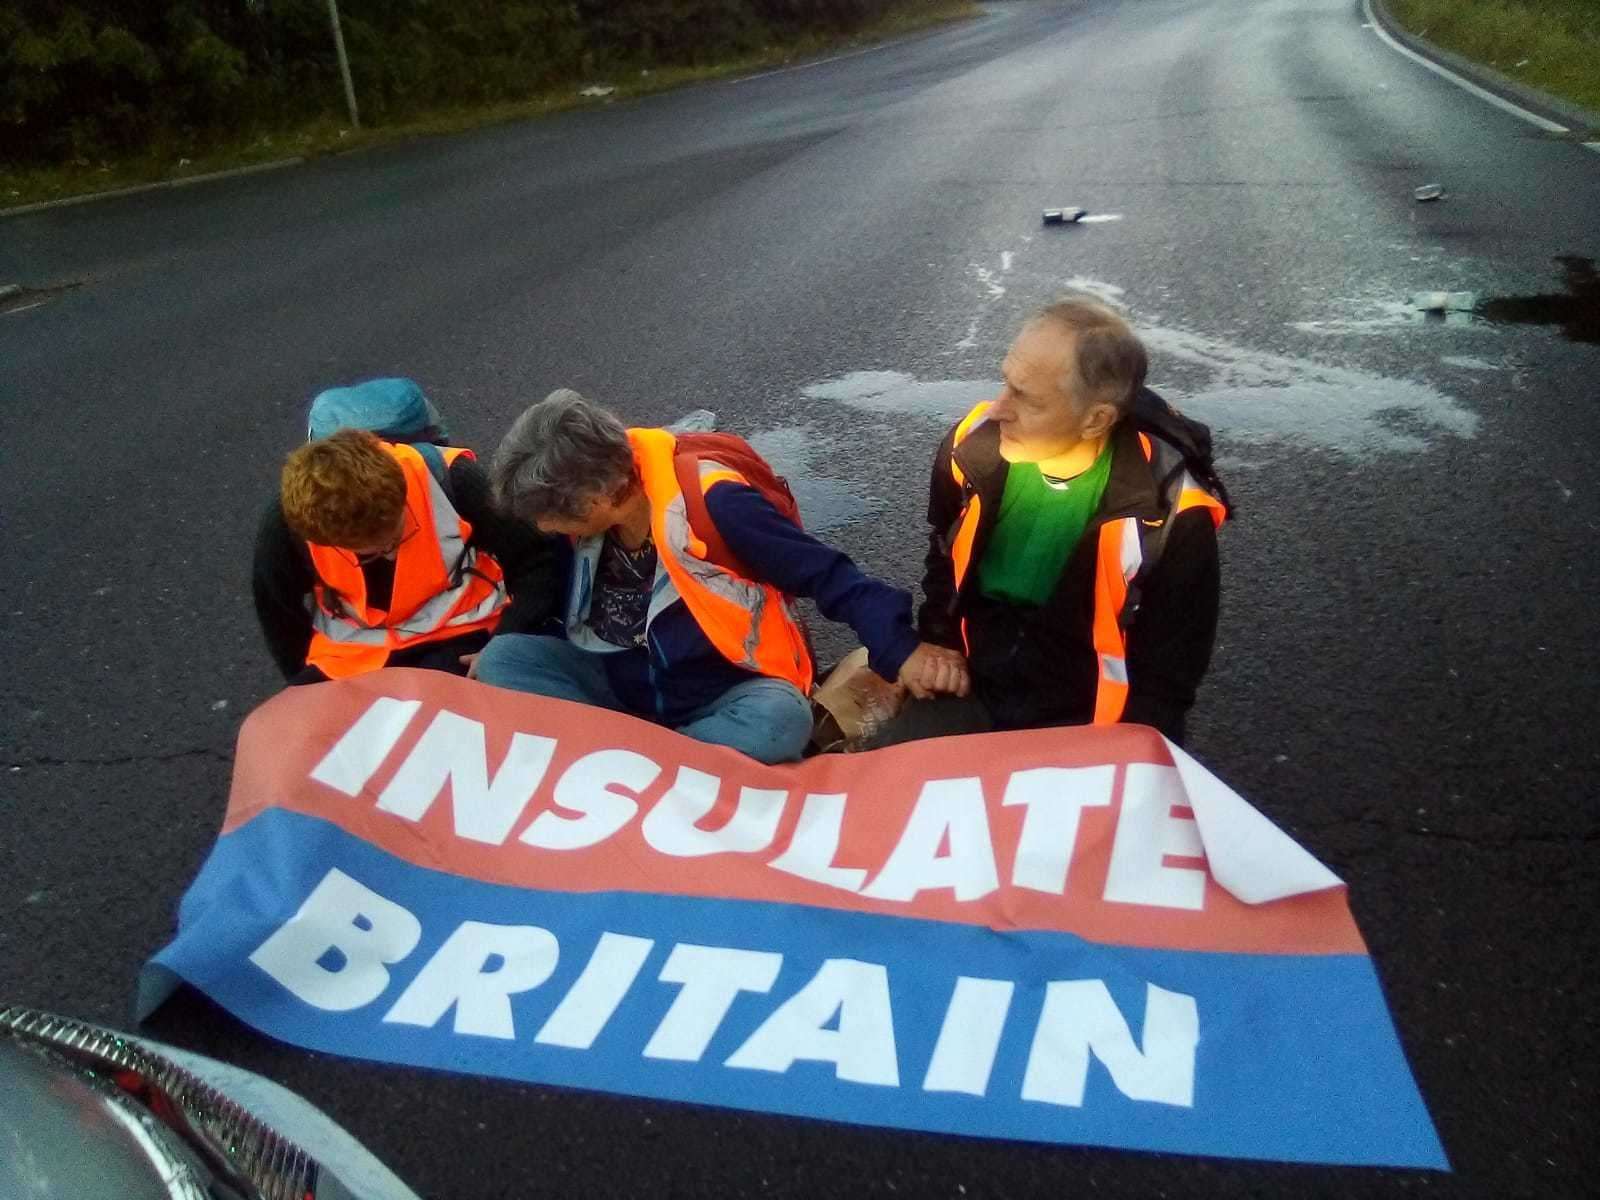 Insulate Britain protesters are blocking a roundabout on the Swanley Interchange of the M25. Photo: Insulate Britain